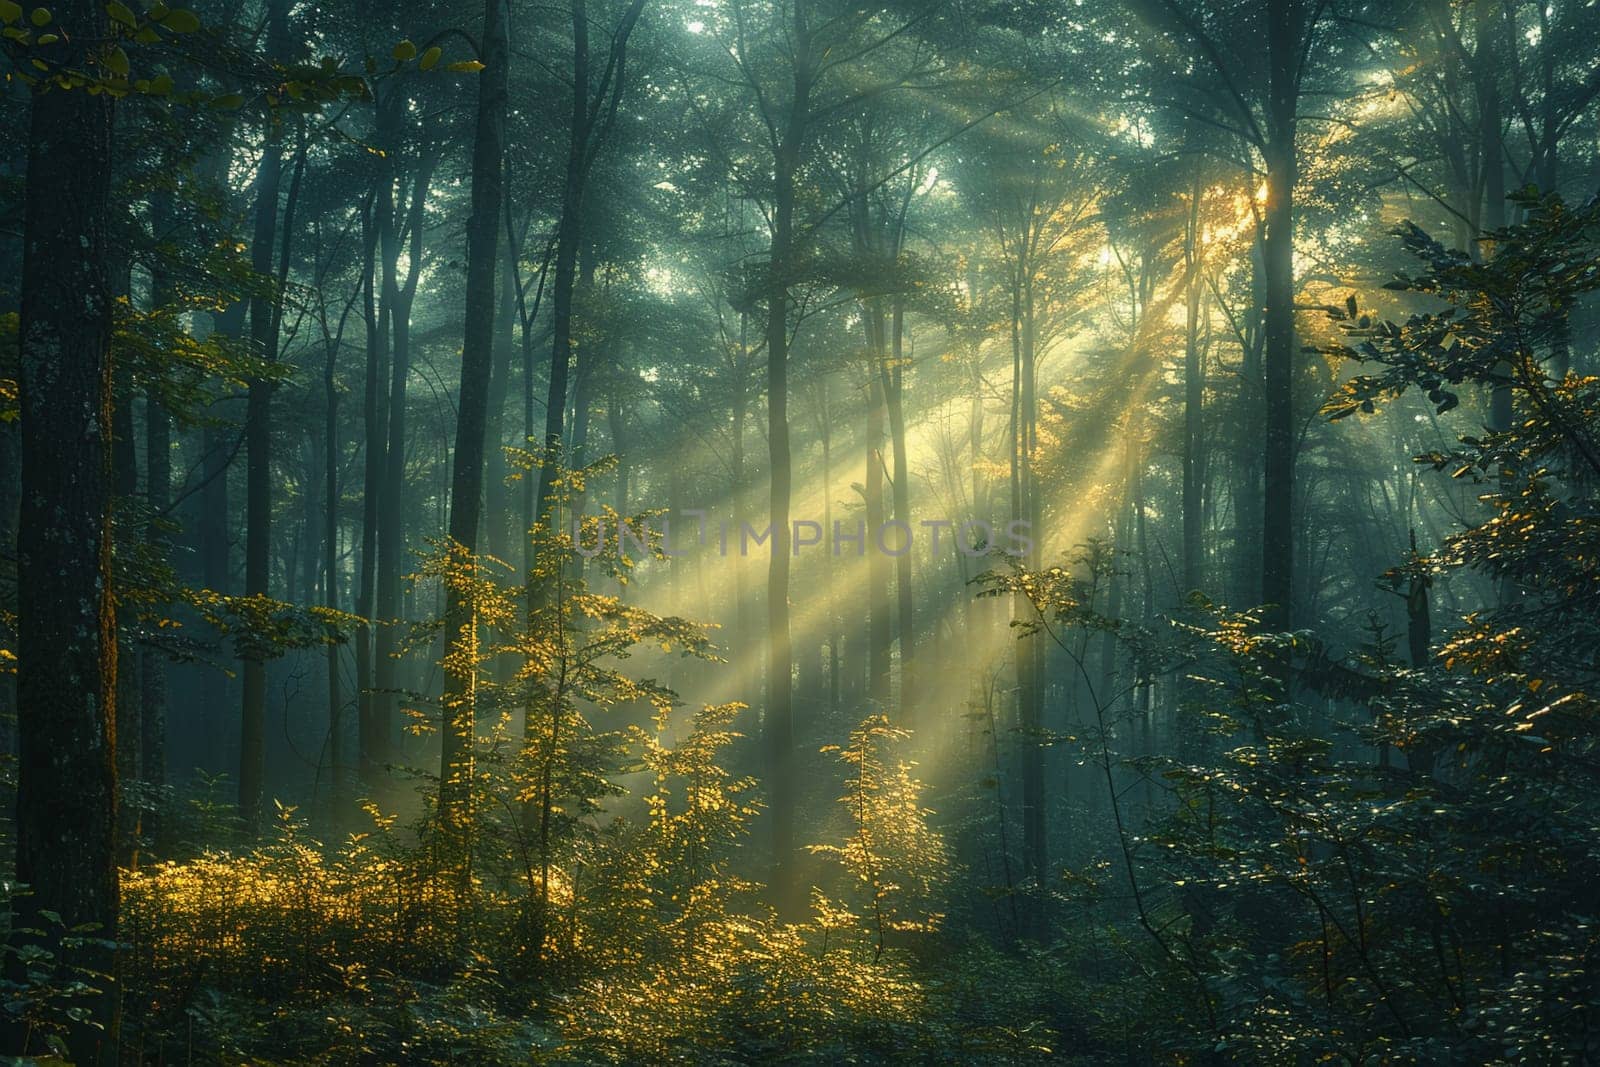 Sunlight filtering through dense forest trees, capturing a mystical and ethereal mood.